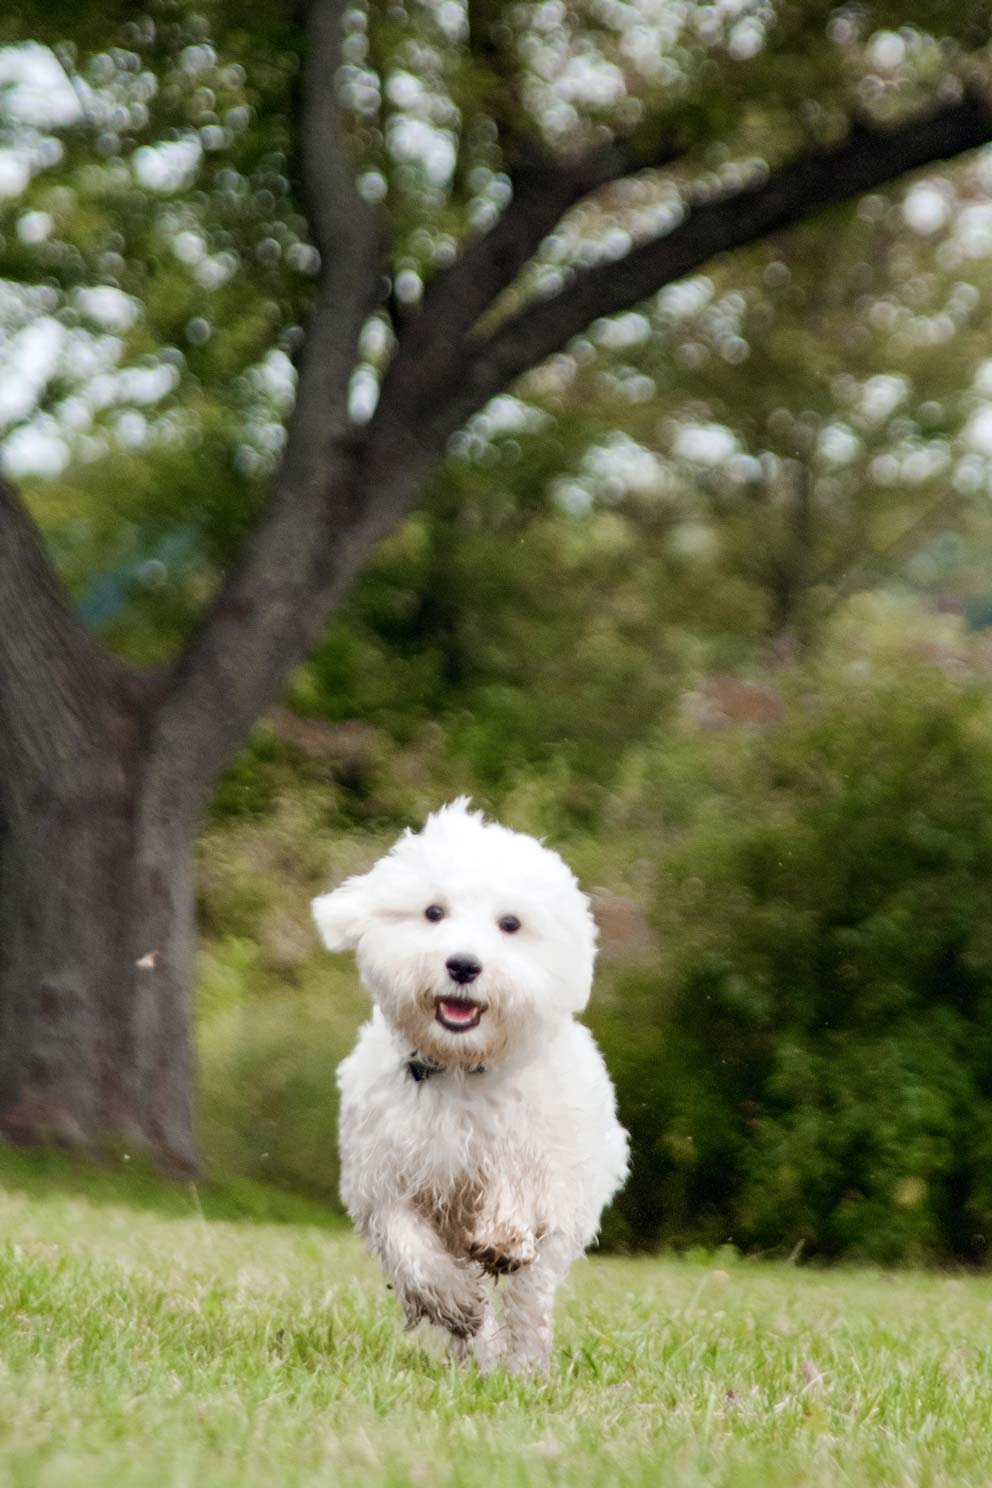 Jack the Maltipoo running in the grass